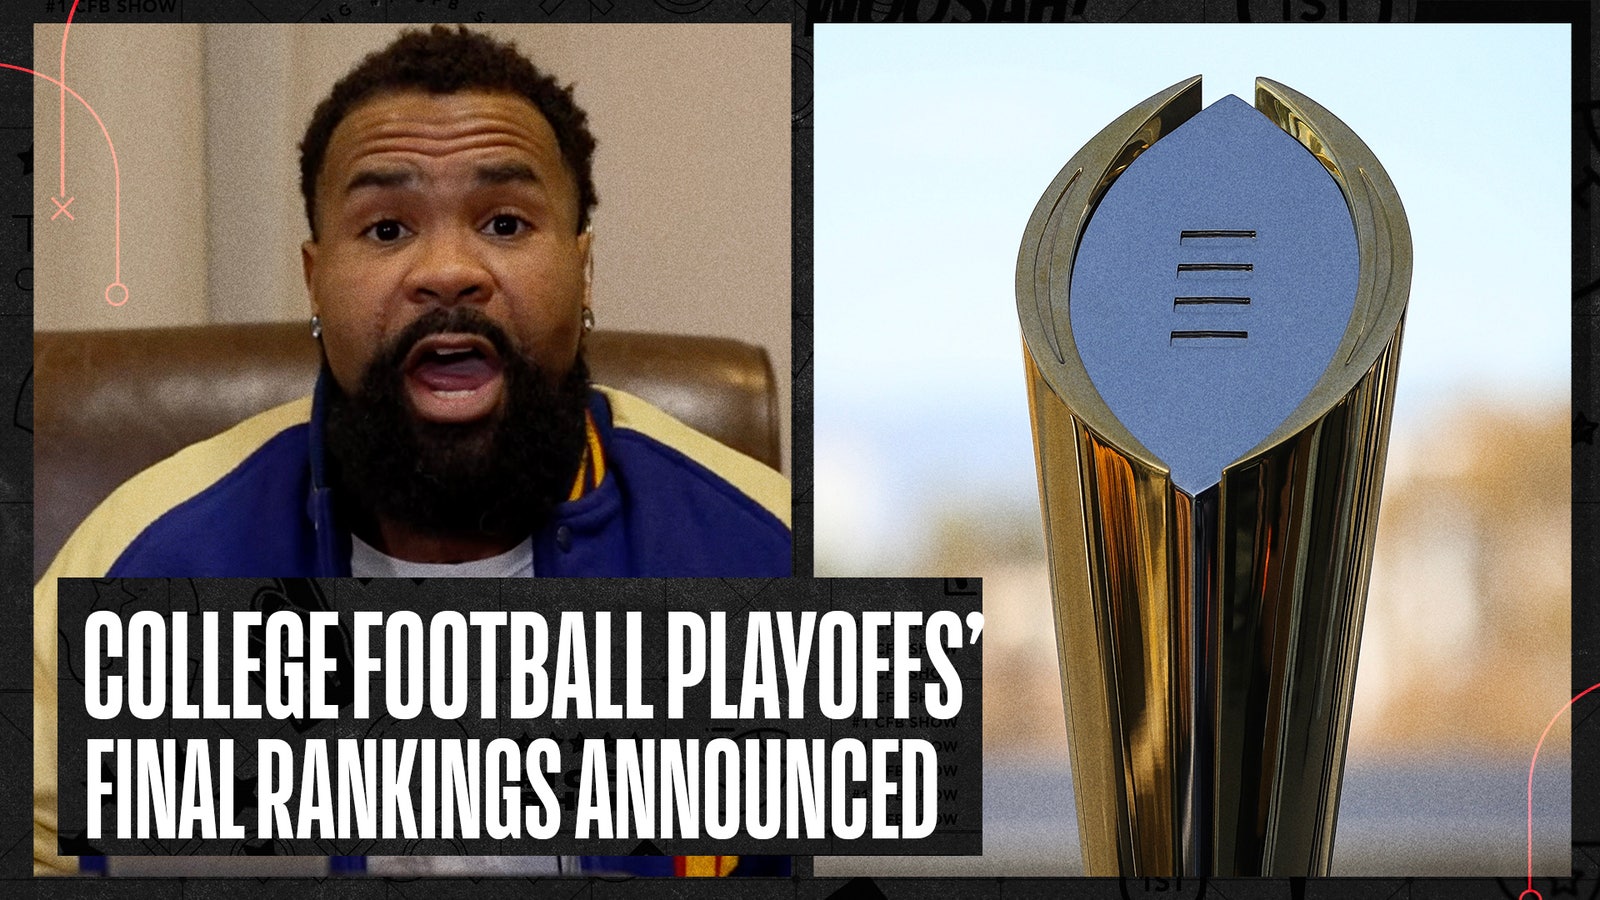 College Football Playoff: TCU is in, Alabama is not